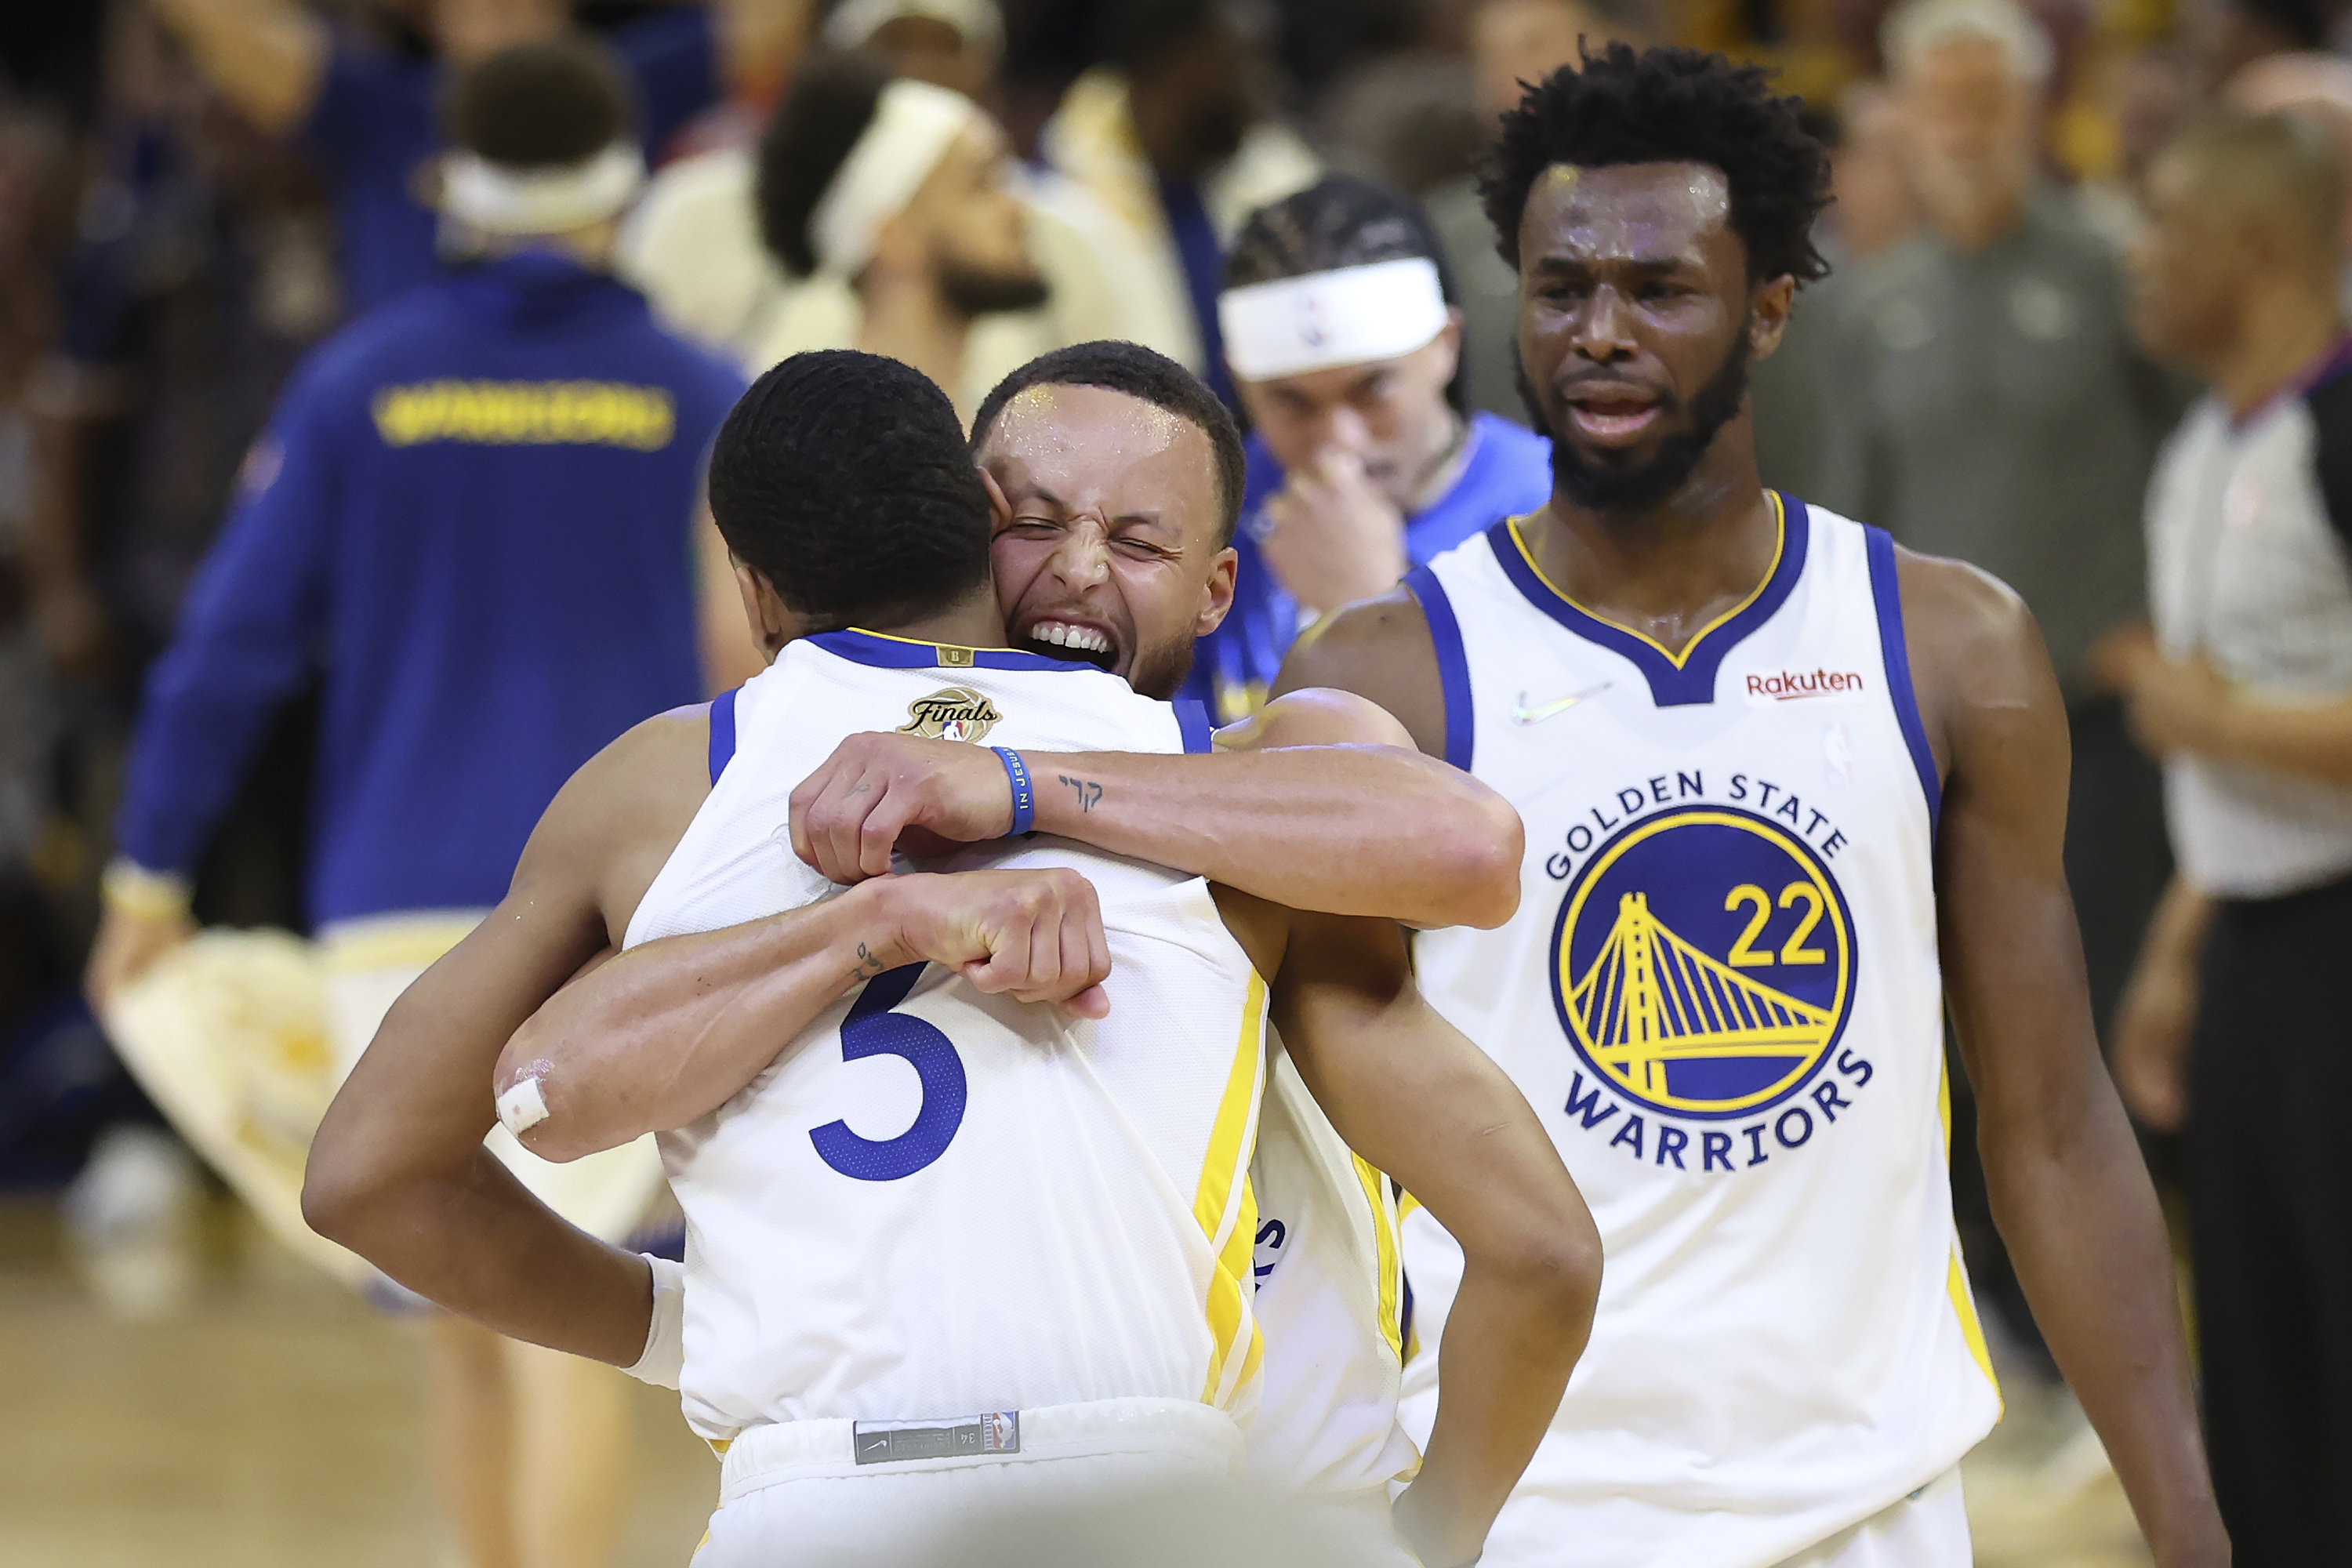 Golden State Of Mind, a Golden State Warriors community